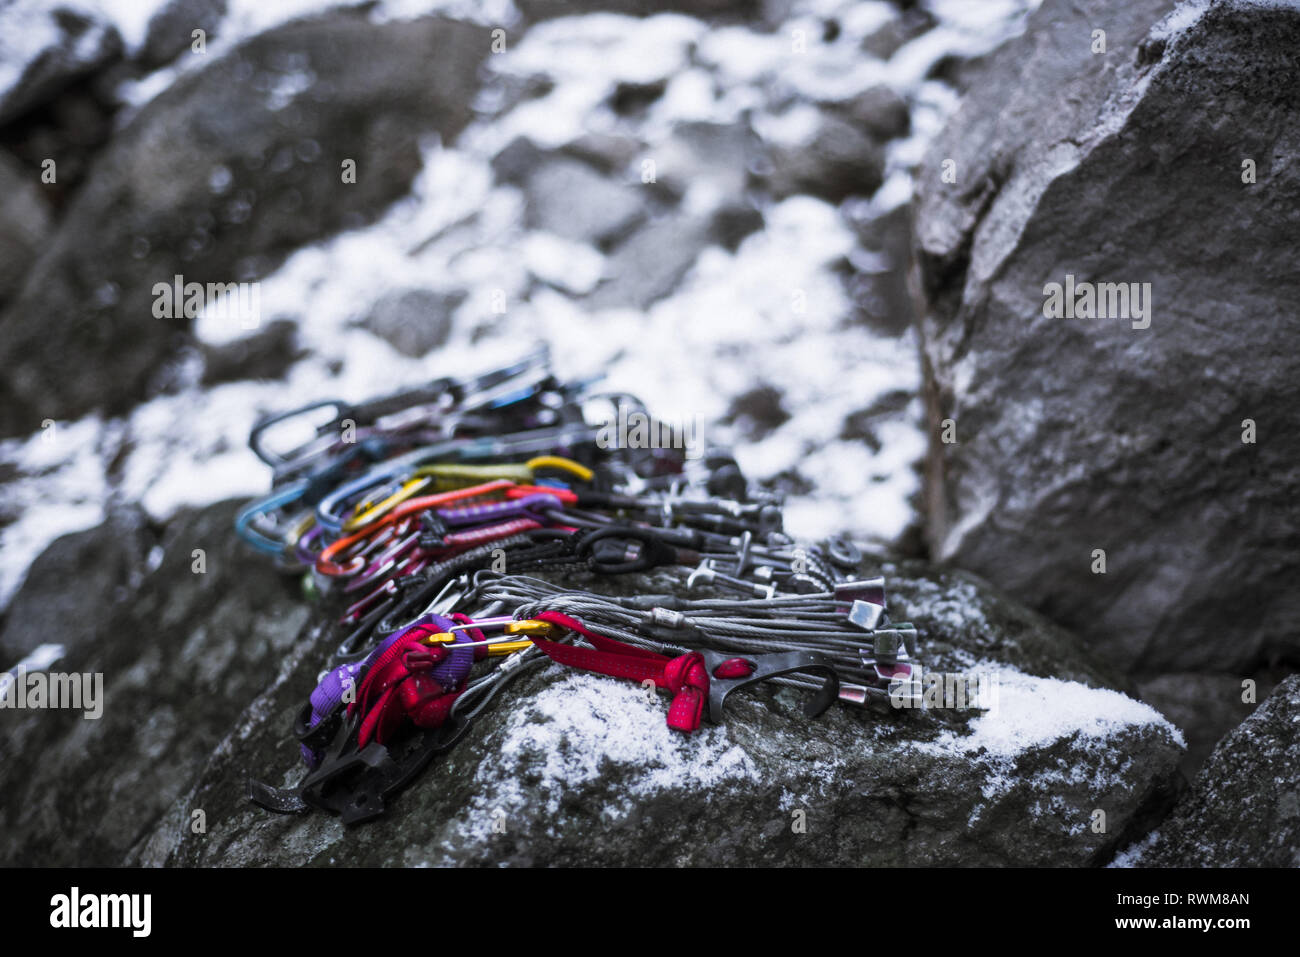 Camming device placed on rock Stock Photo